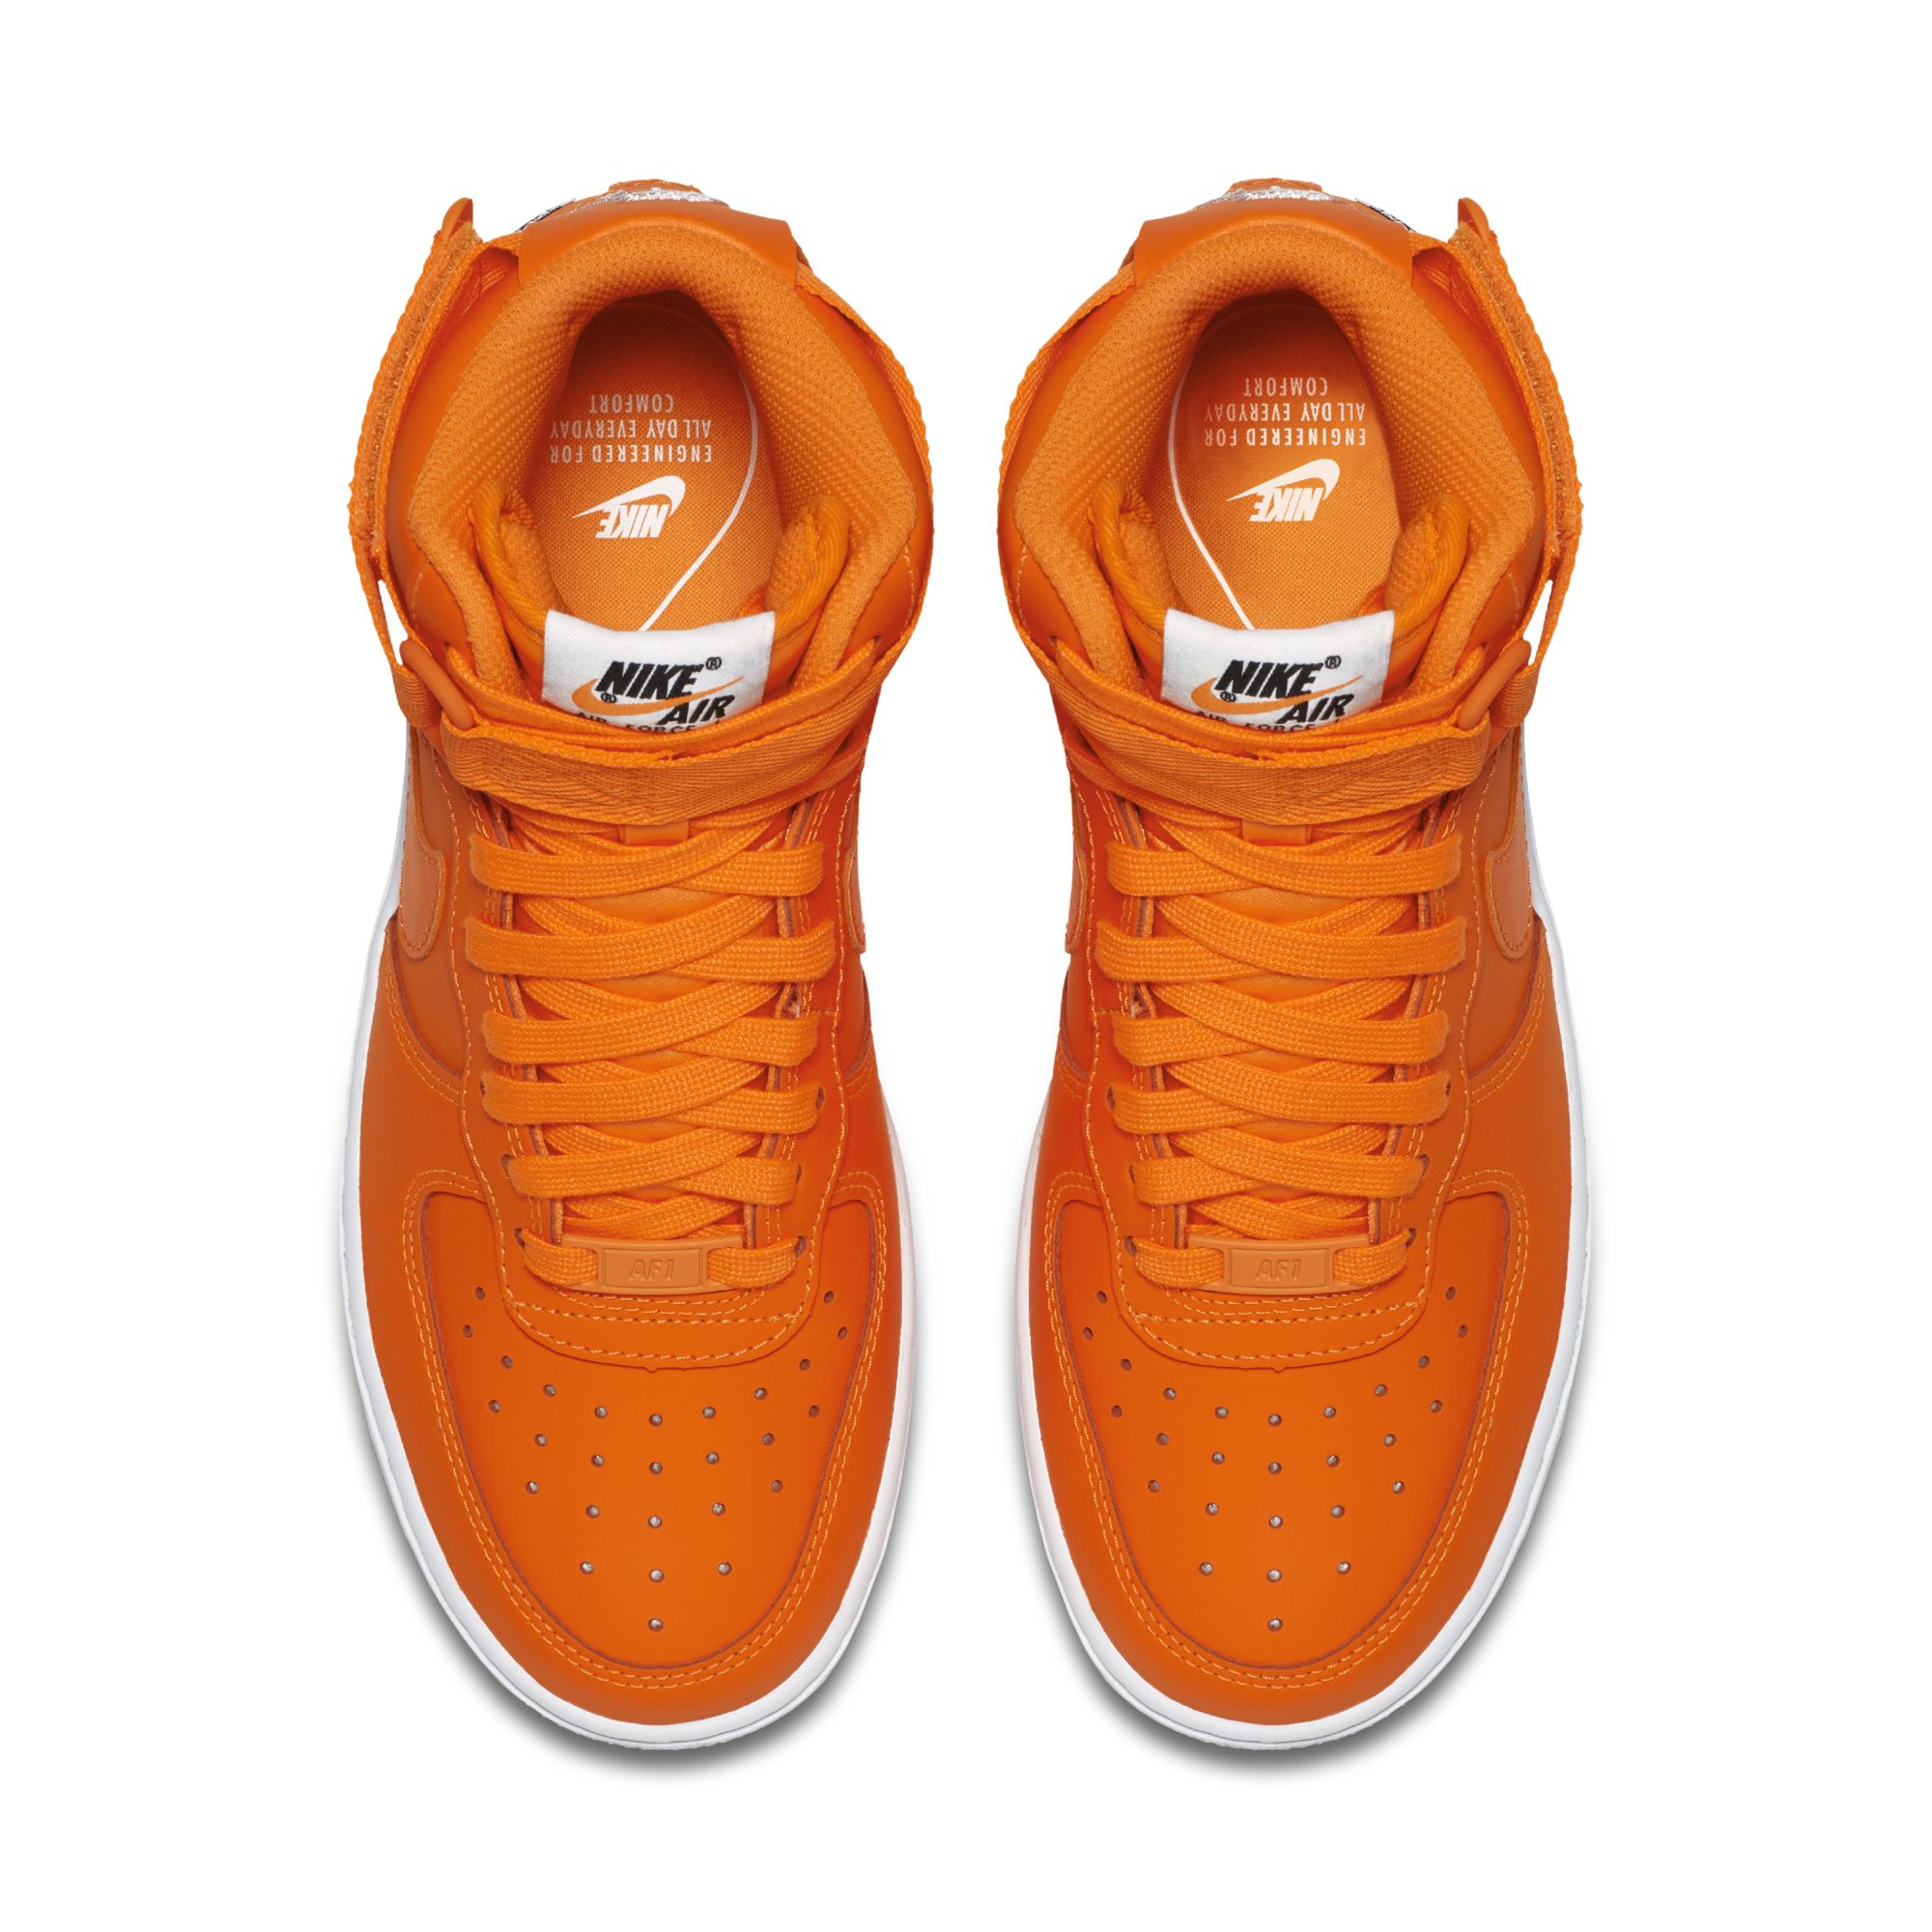 NIKE WMNS AIR FORCE 1 HIGH LX LEATHER TOTAL ORANGE WHITE 2